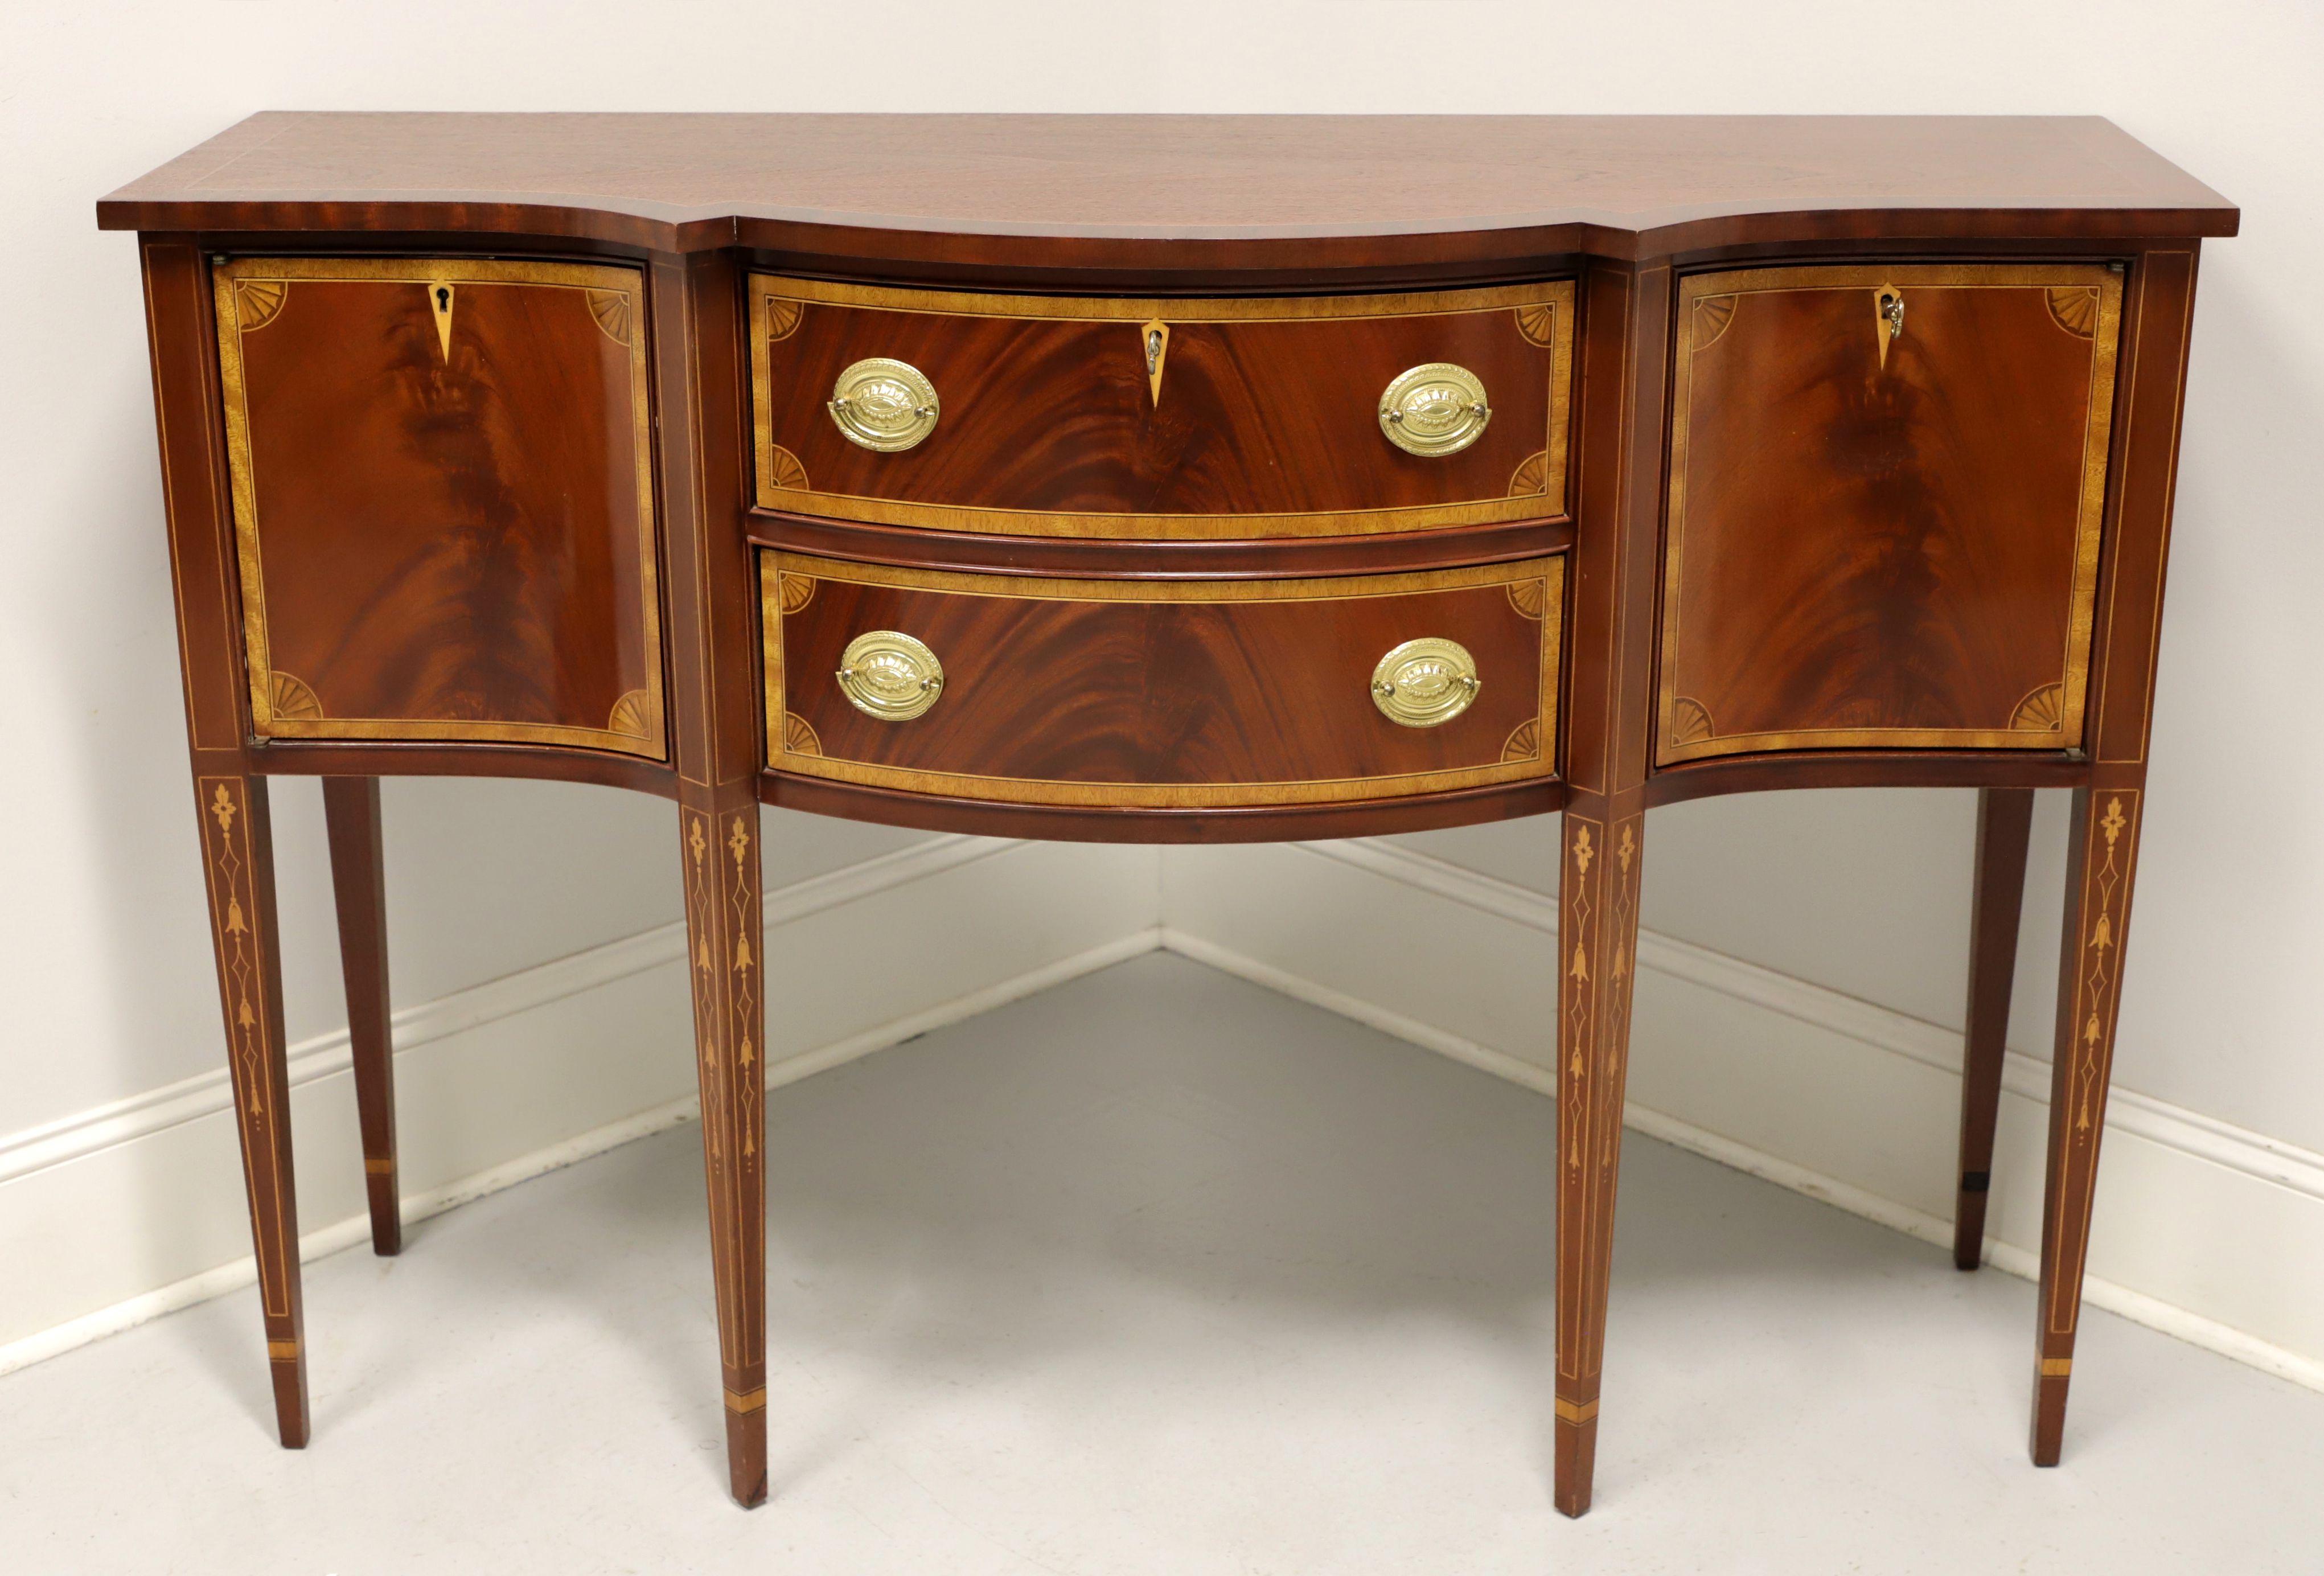 A Hepplewhite style sideboard by Councill. Flame mahogany, banded top, satinwood inlays to drawers, doors & legs, brass hardware and tapered straight legs. Features two center dovetail drawers, top drawer being lockable, flanked by lockable one door